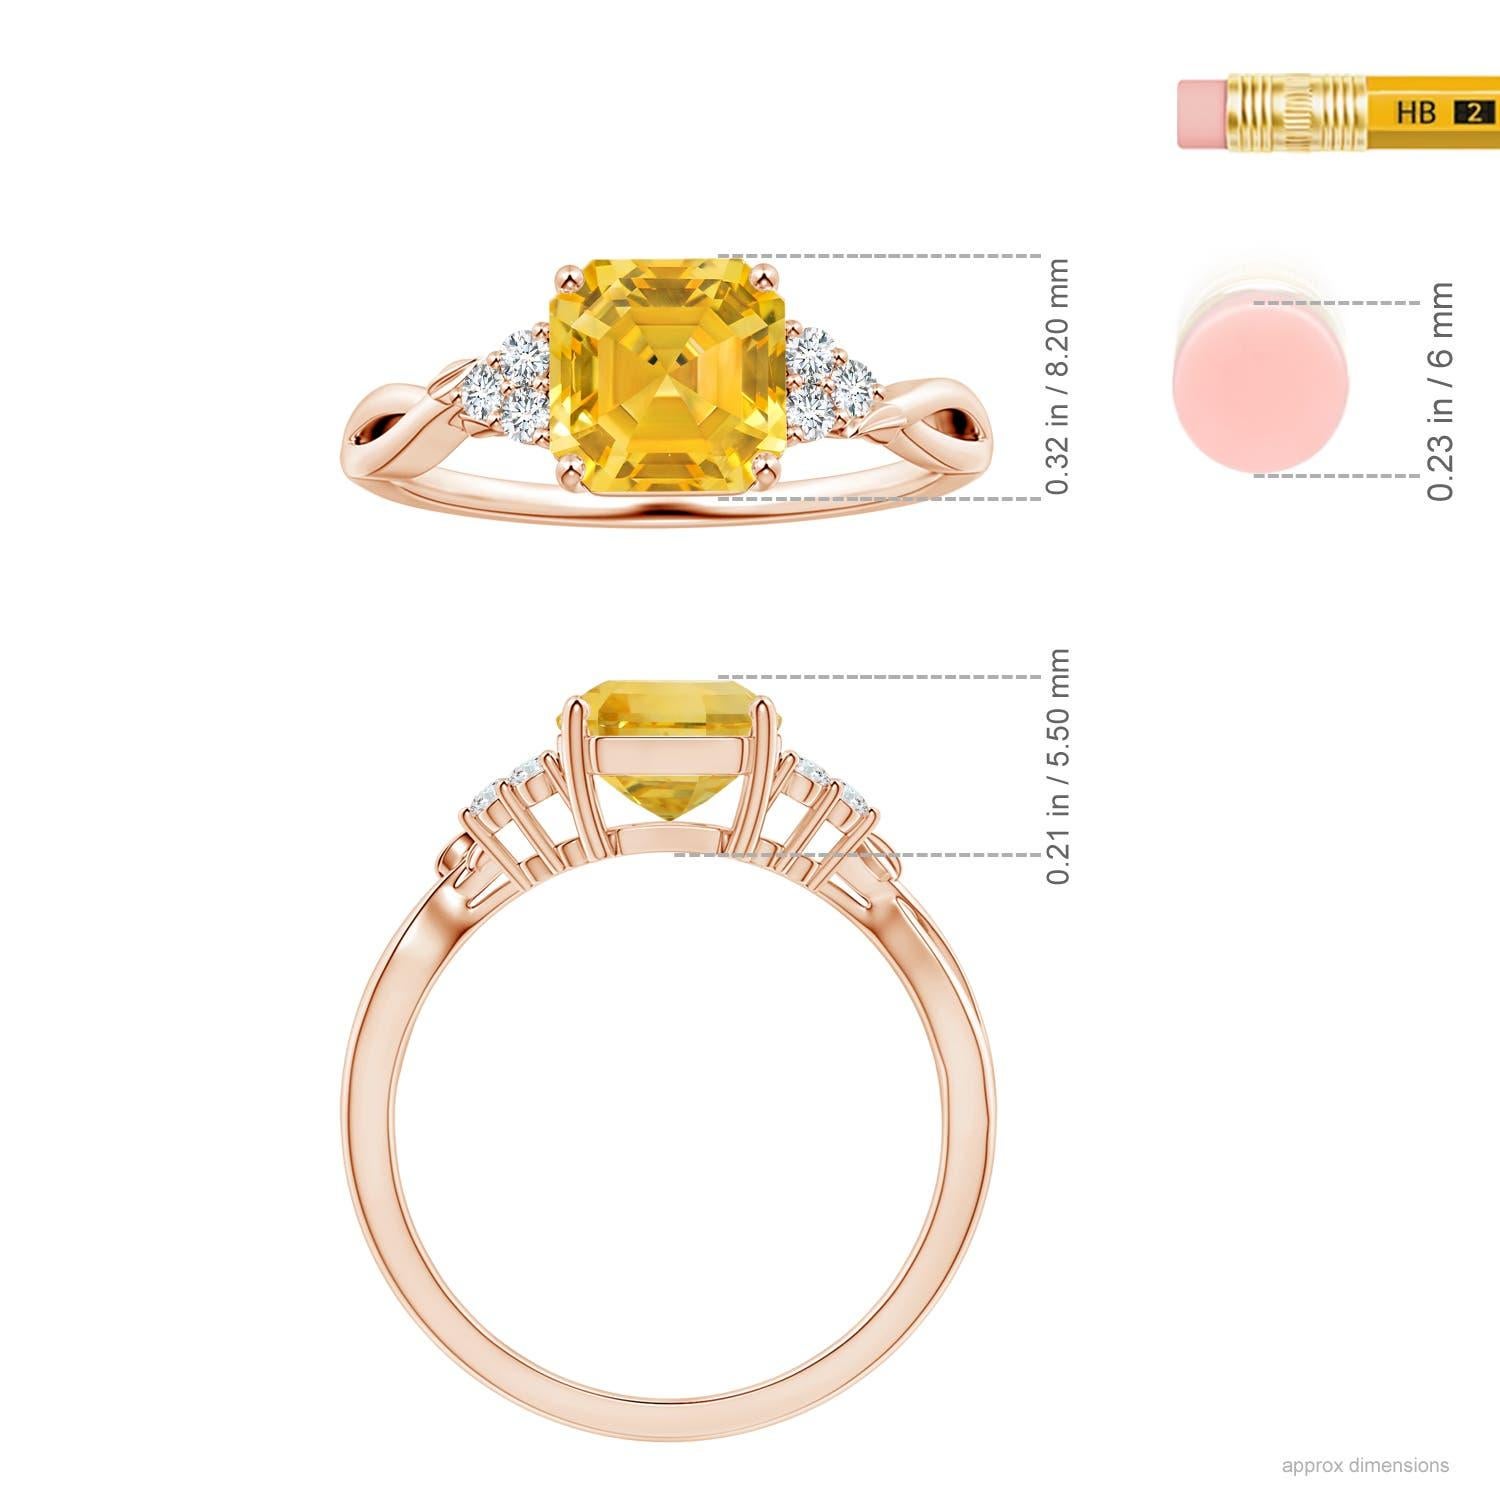 For Sale:  Angara Gia Certified Emerald-Cut Yellow Sapphire & Diamond Ring in Rose Gold 5